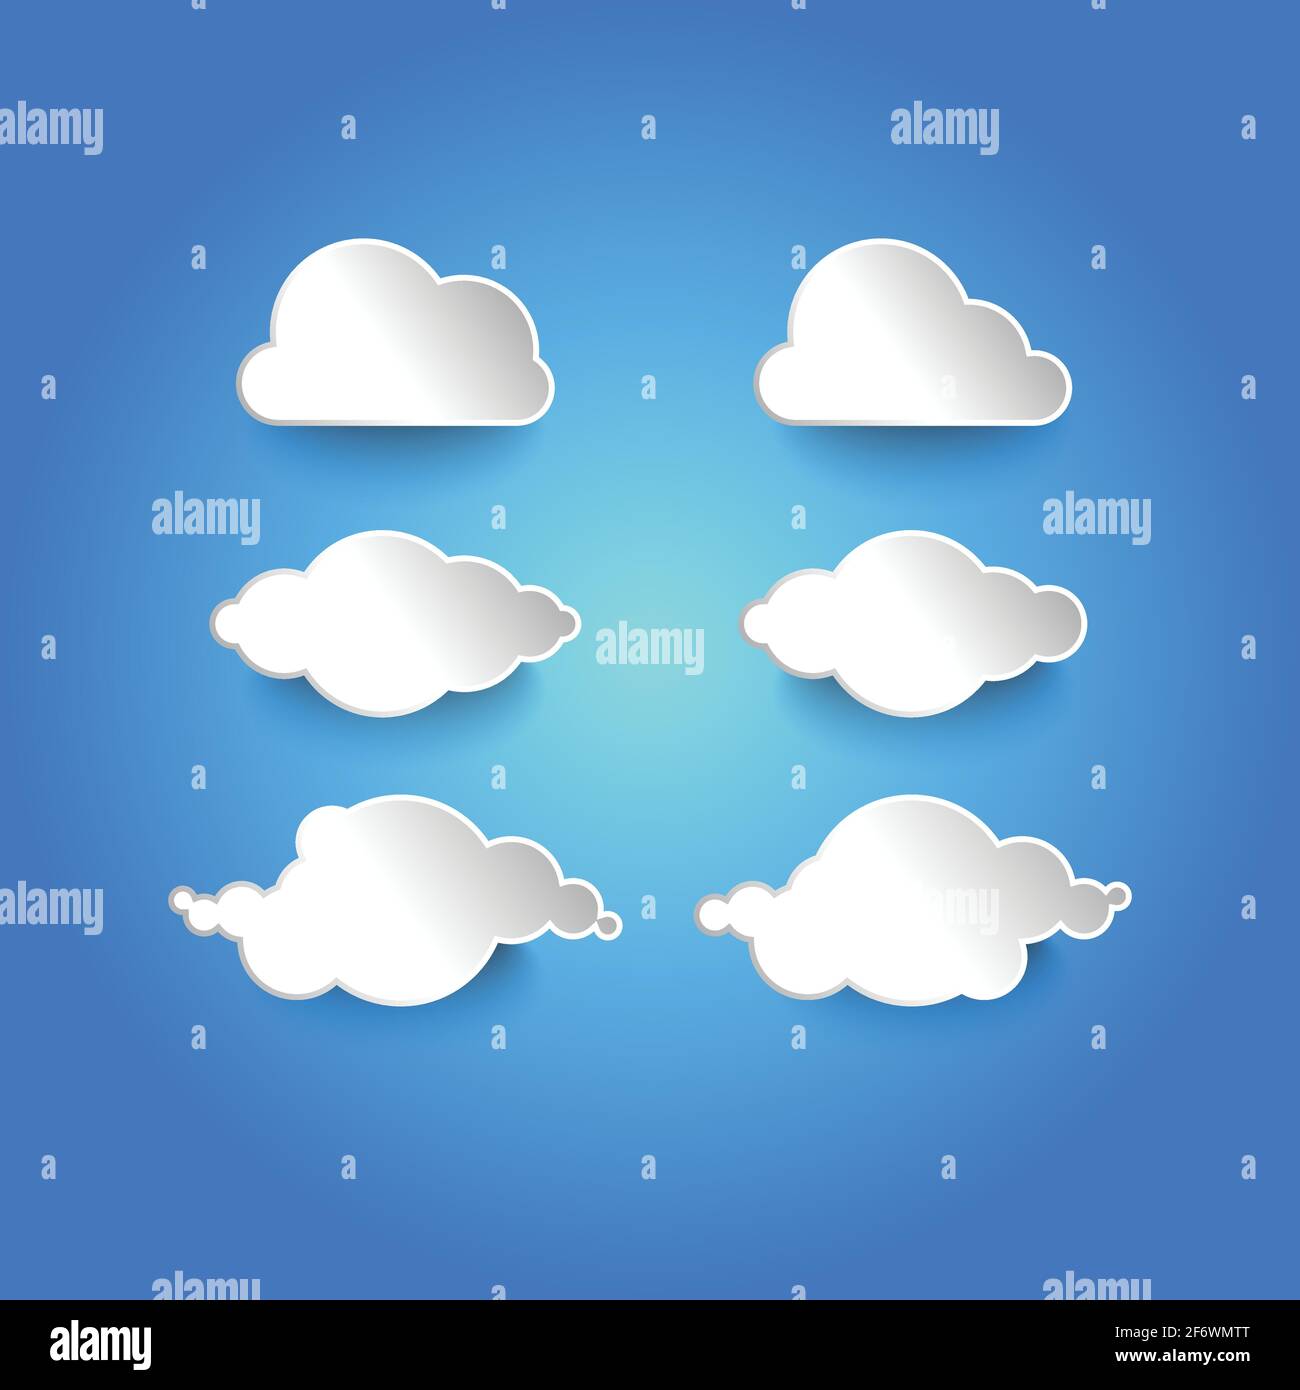 Vector illustration of clouds.clouds icon template. clouds background ...